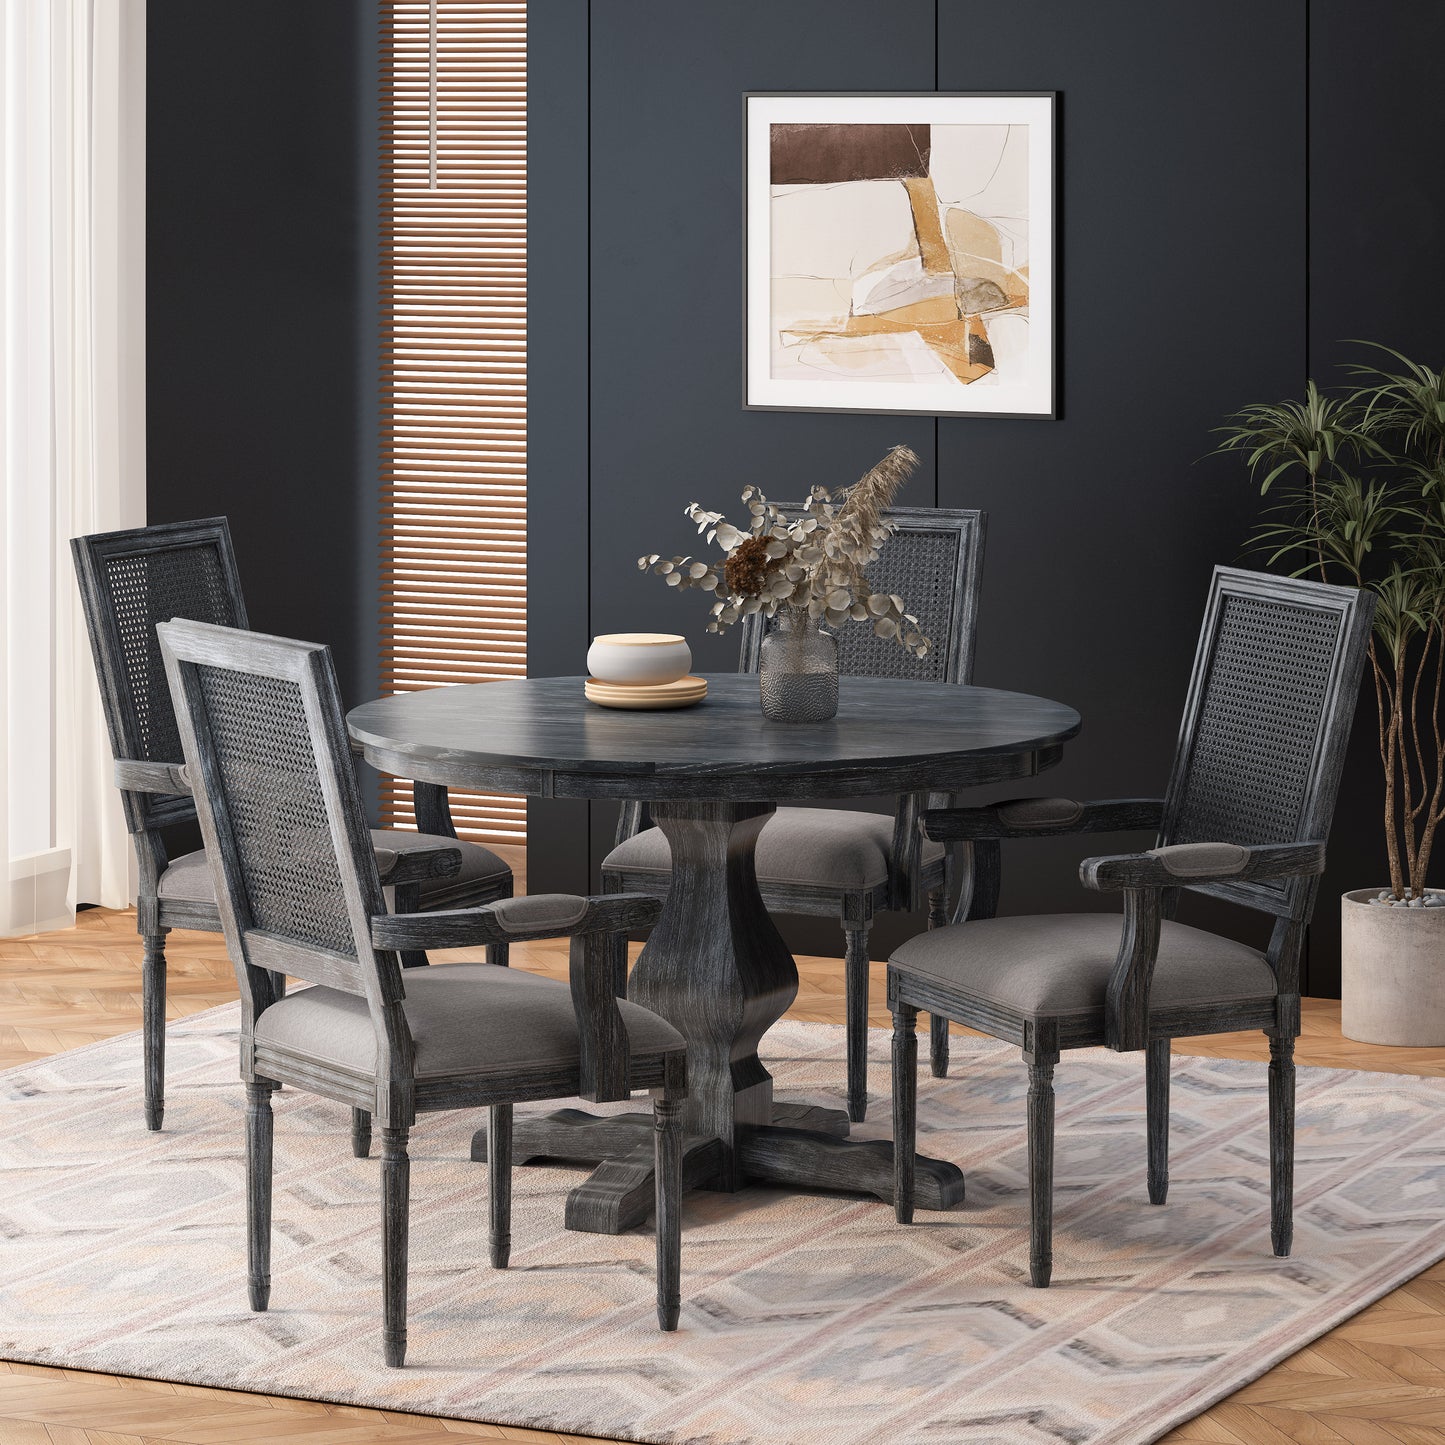 Joretta French Country Fabric Upholstered Wood and Cane 5 Piece Circular Dining Set